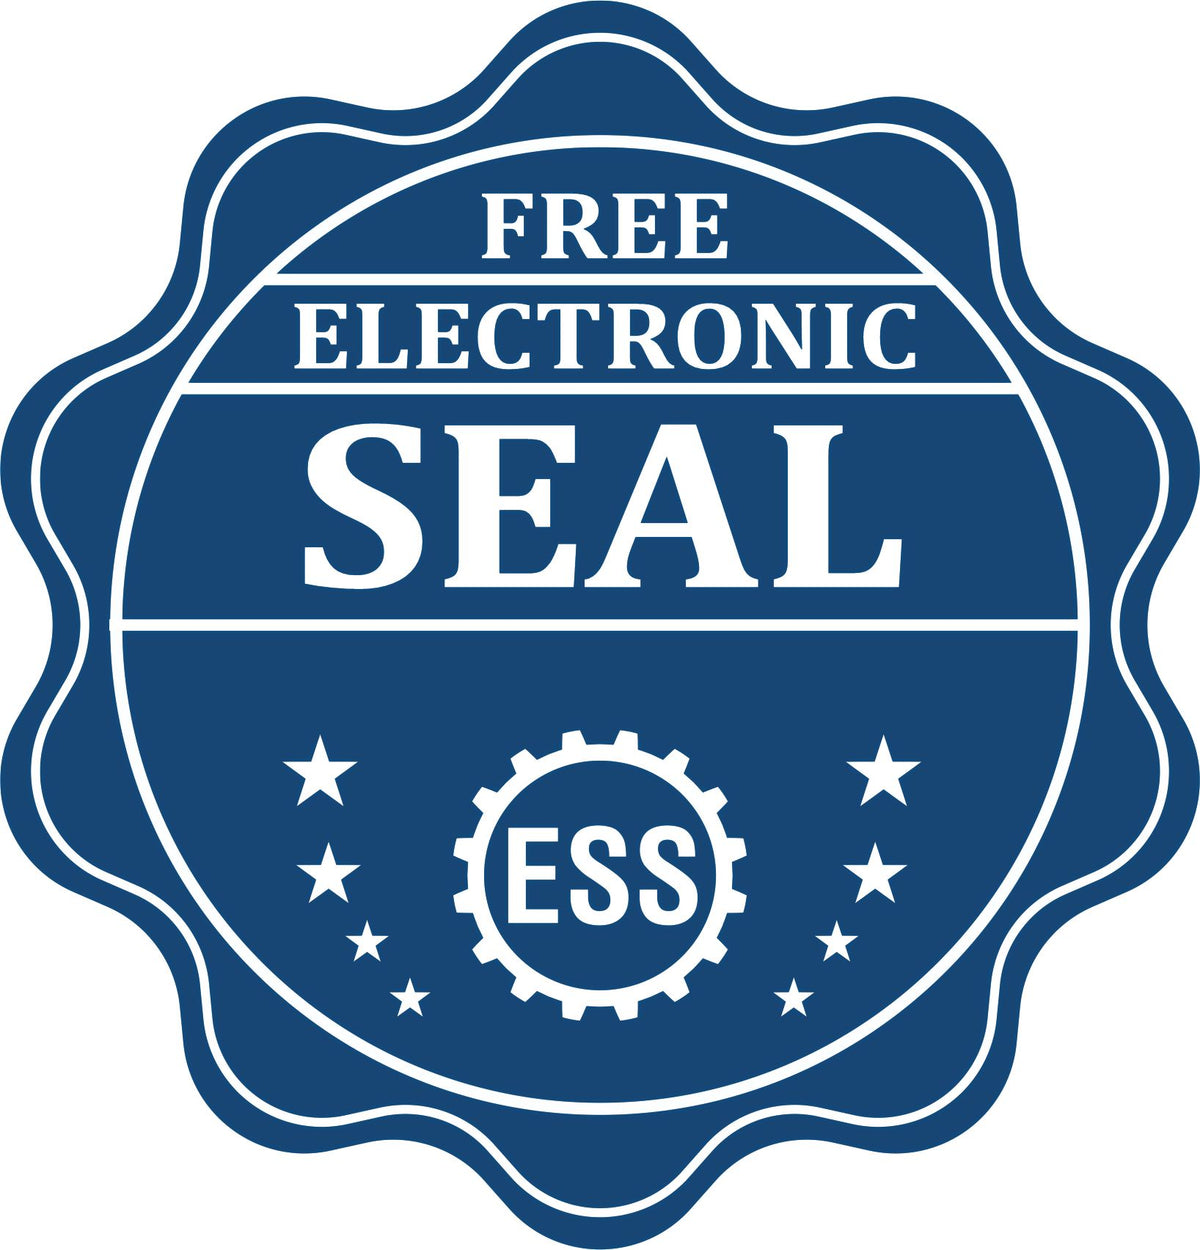 A badge showing a free electronic seal for the Gift Arkansas Engineer Seal with stars and the ESS gear on the emblem.